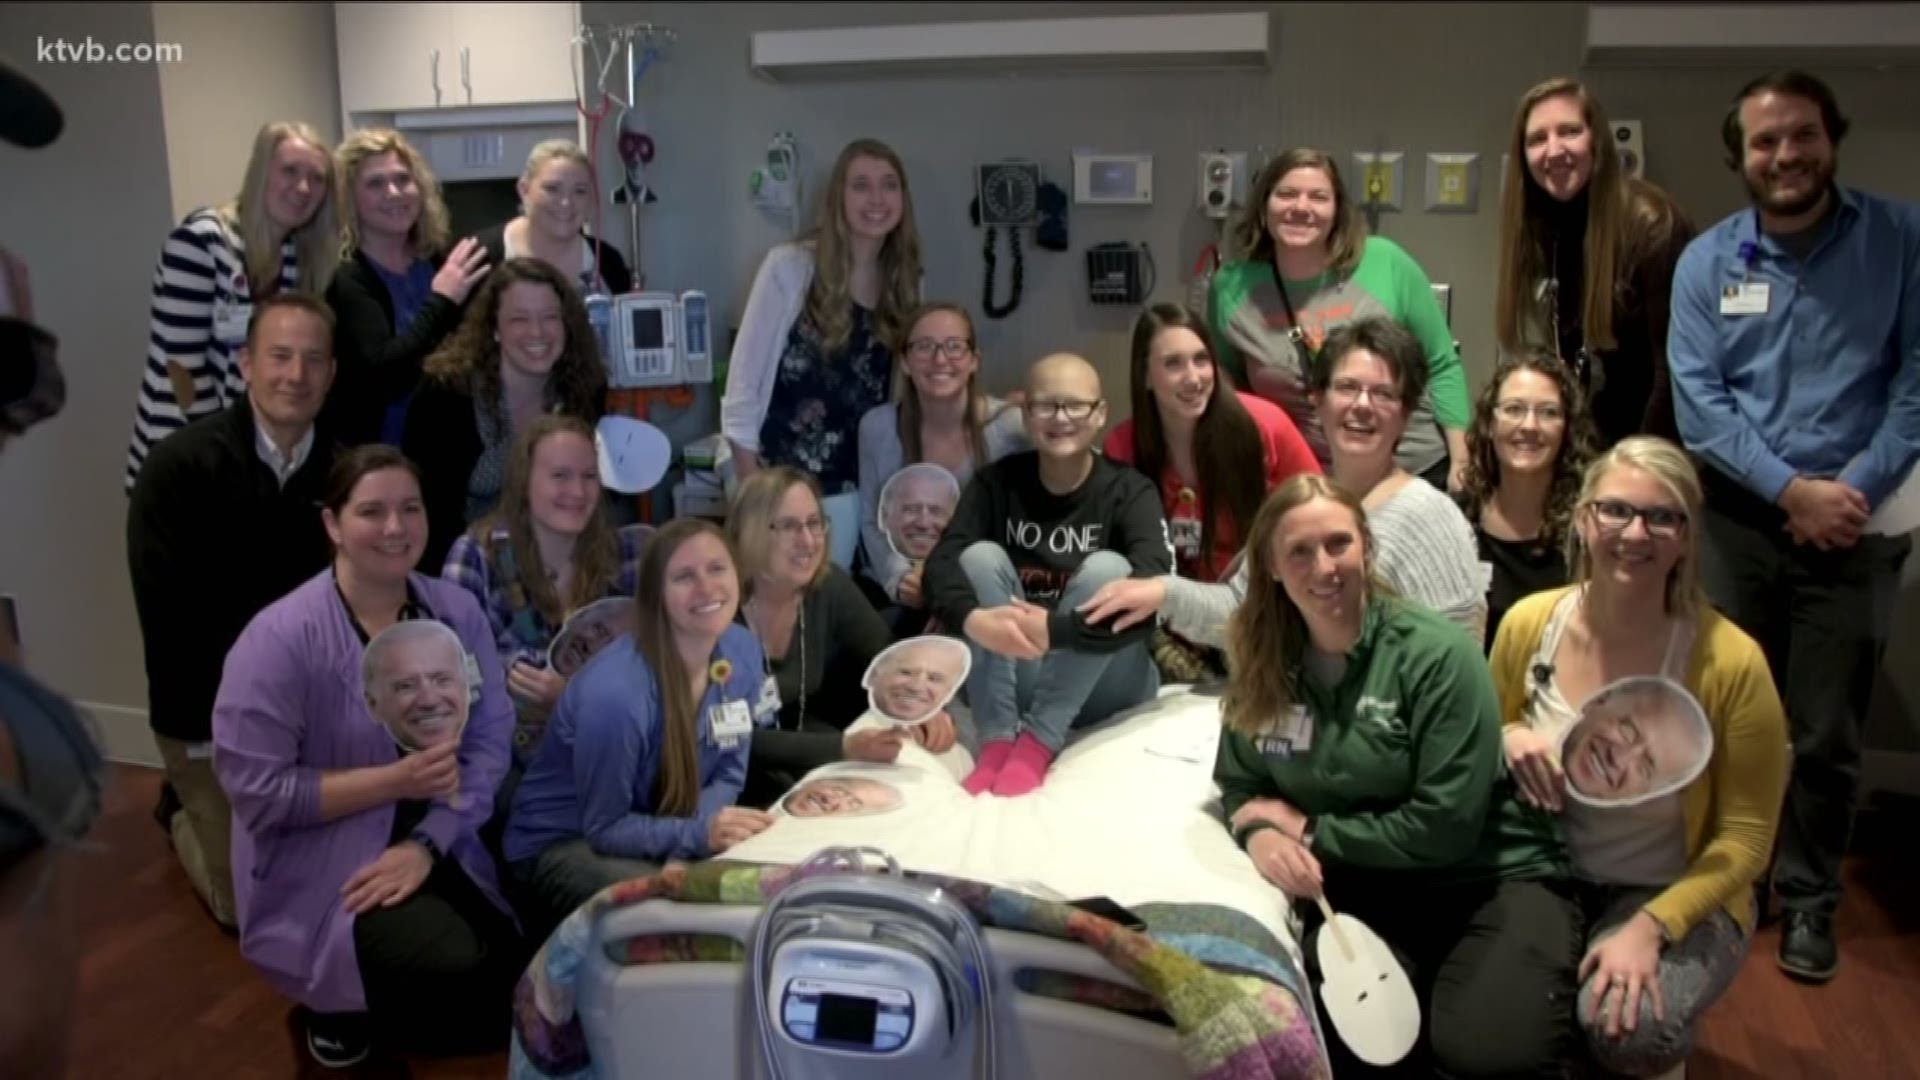 After being diagnosed with a progressive form of acute myeloid leukemia (AML), Shaffer has missed most of her senior year at Fruitland High School, but her nurses at St. Luke's and the community of Fruitland have rallied around her, even reaching out to f